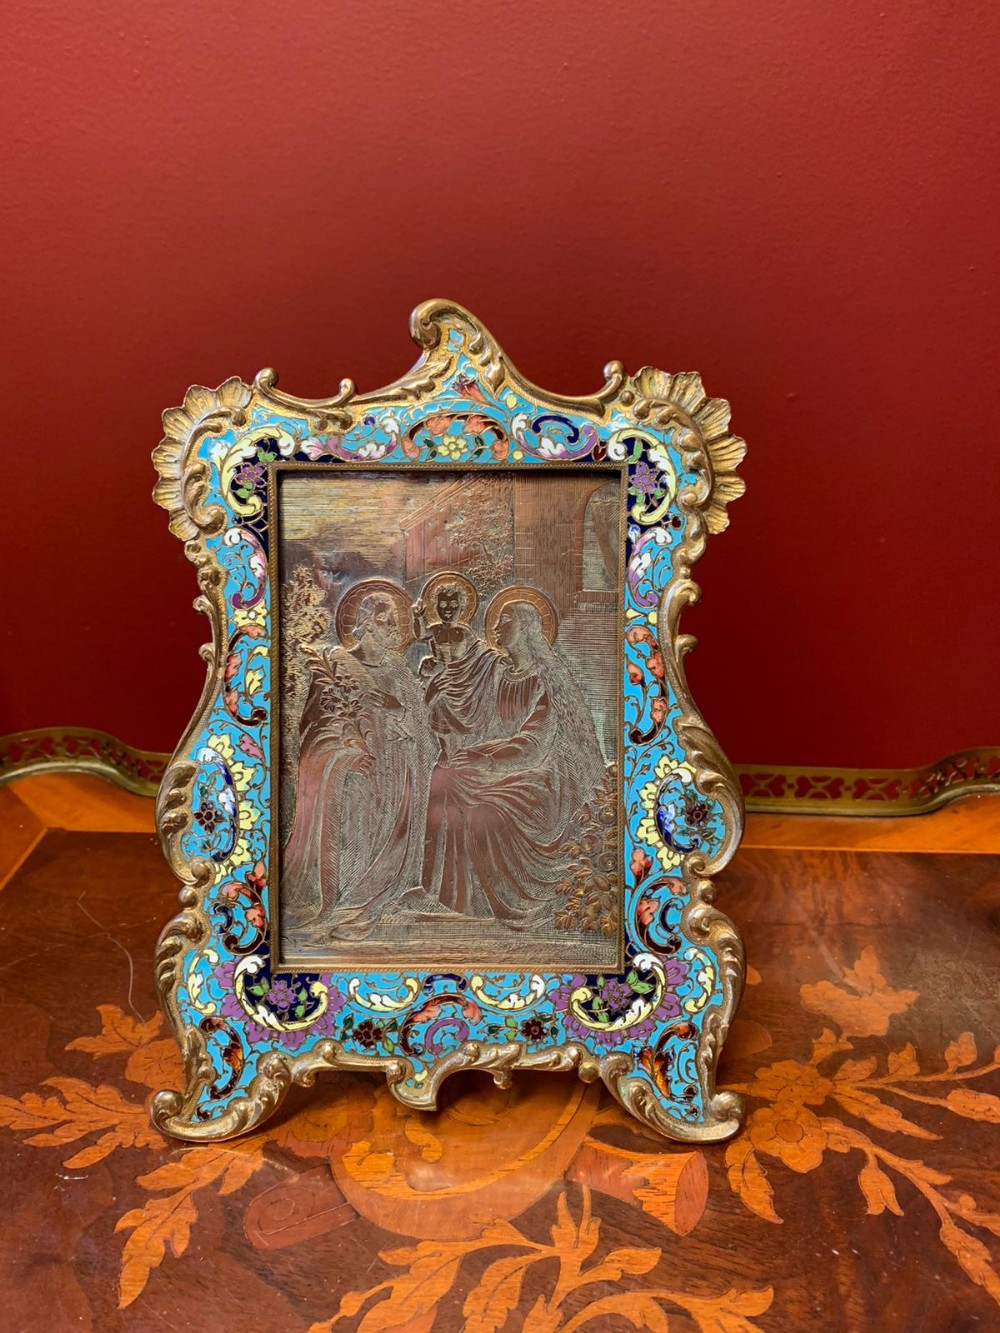 Antique Large French Champleve Enamel Cloisonne Picture Frame